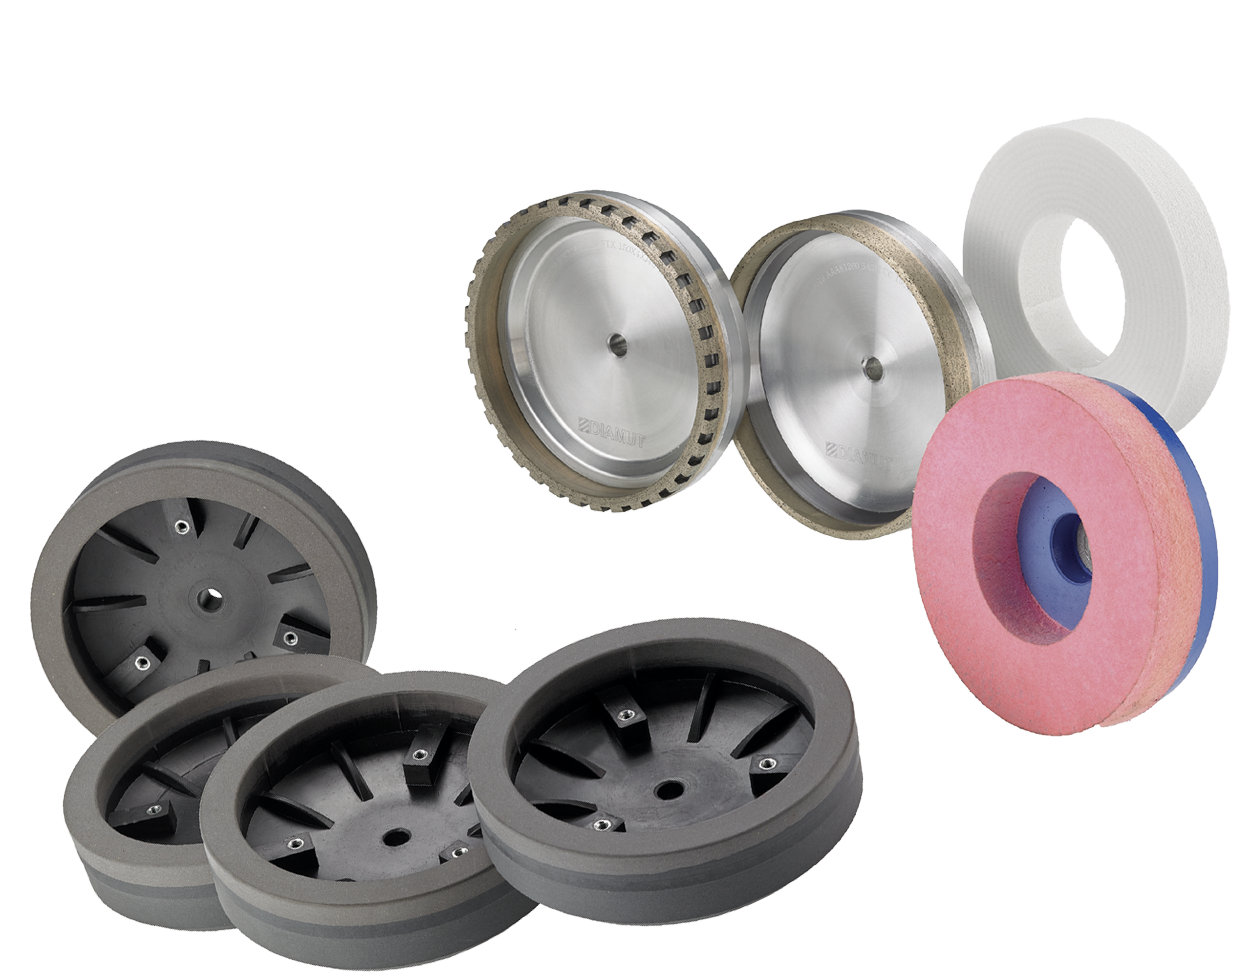 Cup grinding wheels for bevelling machines: Photo 1